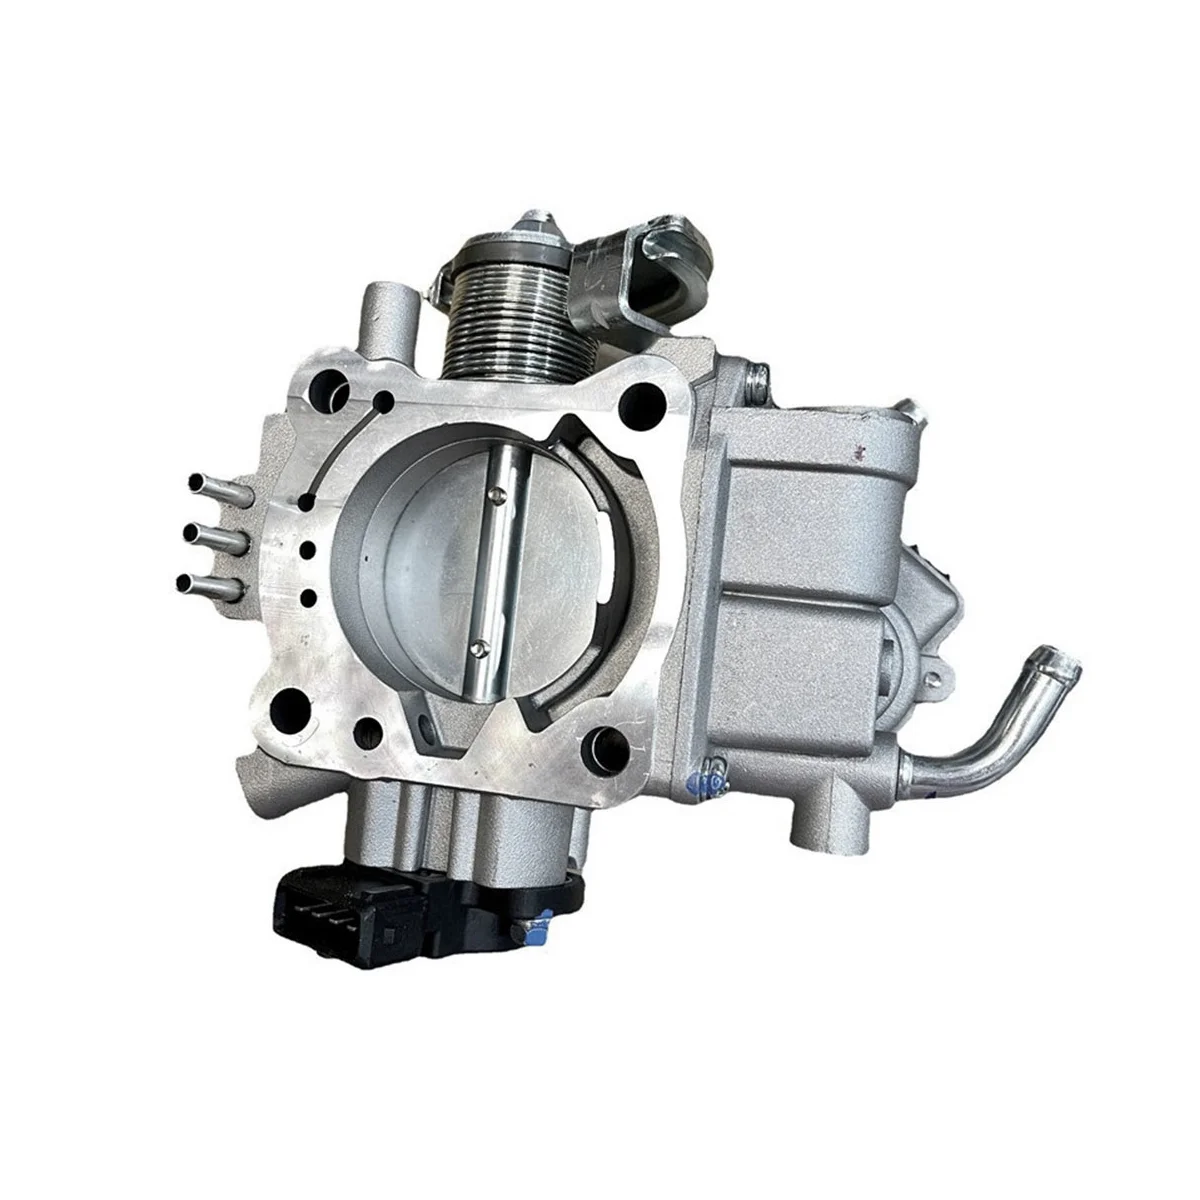 Auto Throttle Body embly for  Galant 2.0L 2WD Engine Code 4G64 4G63 MR579011 MD3 - £360.86 GBP